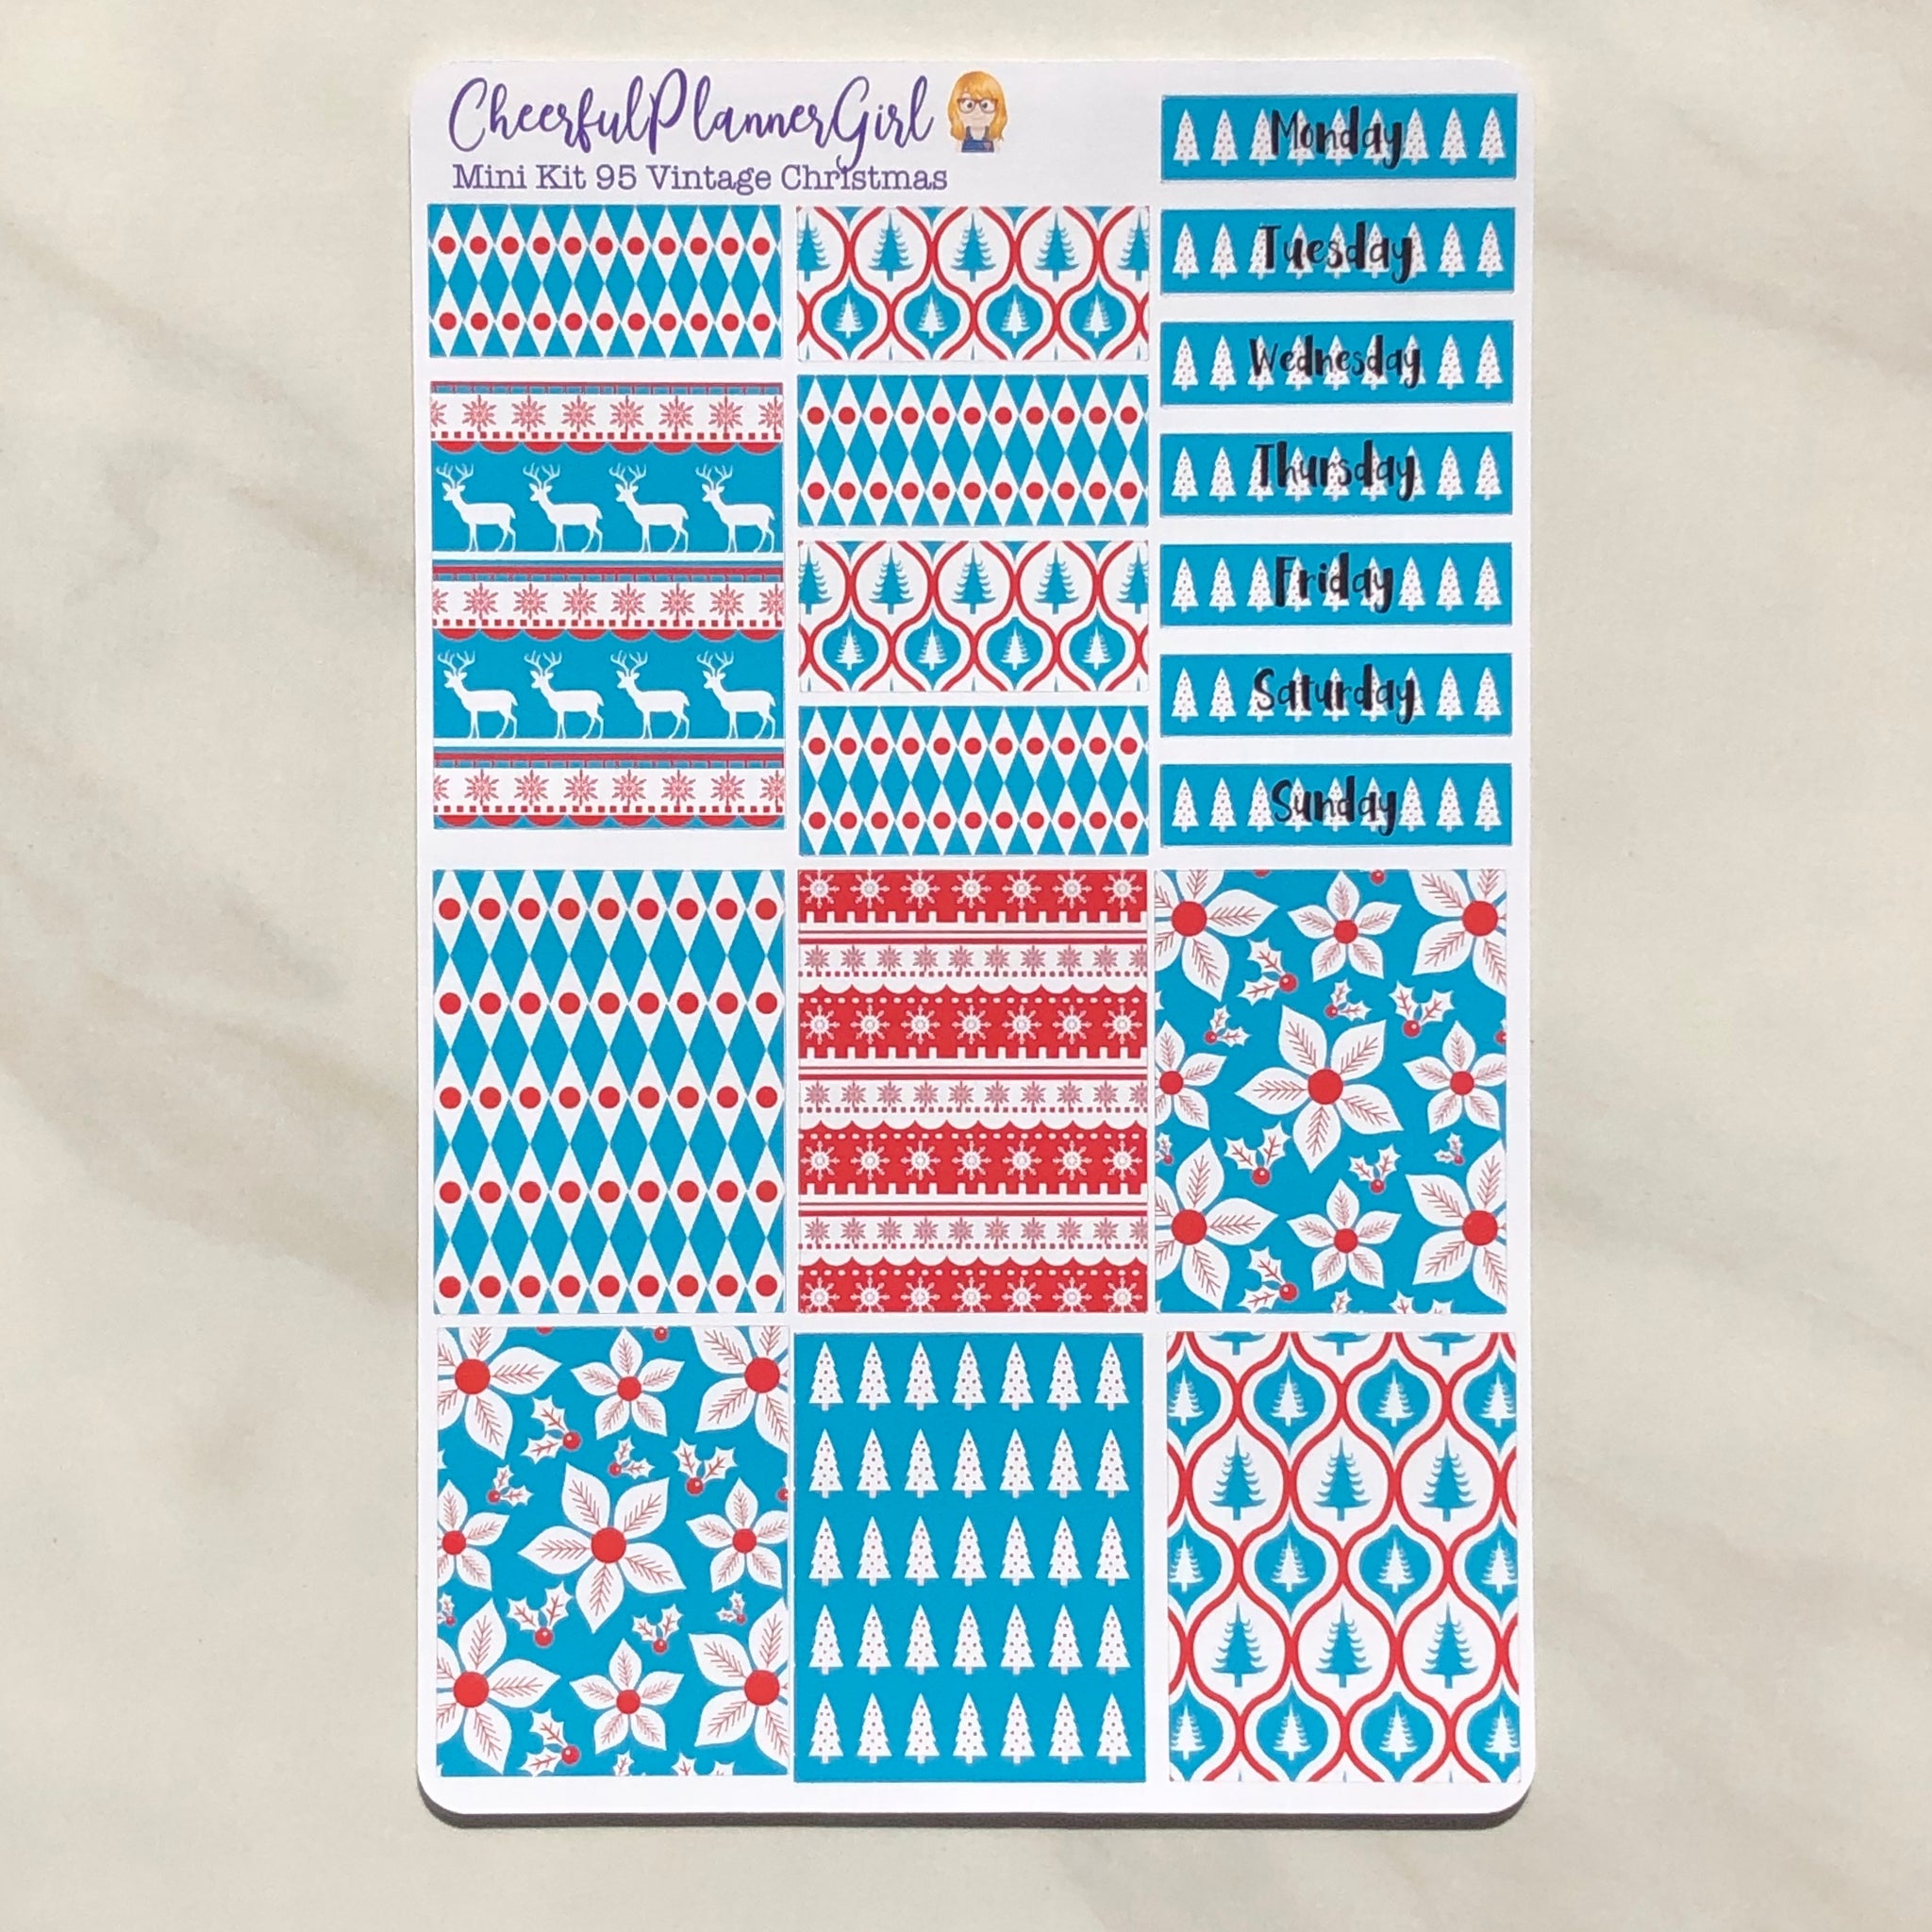 Vintage Christmas Mini Kit Weekly Layout Planner Stickers